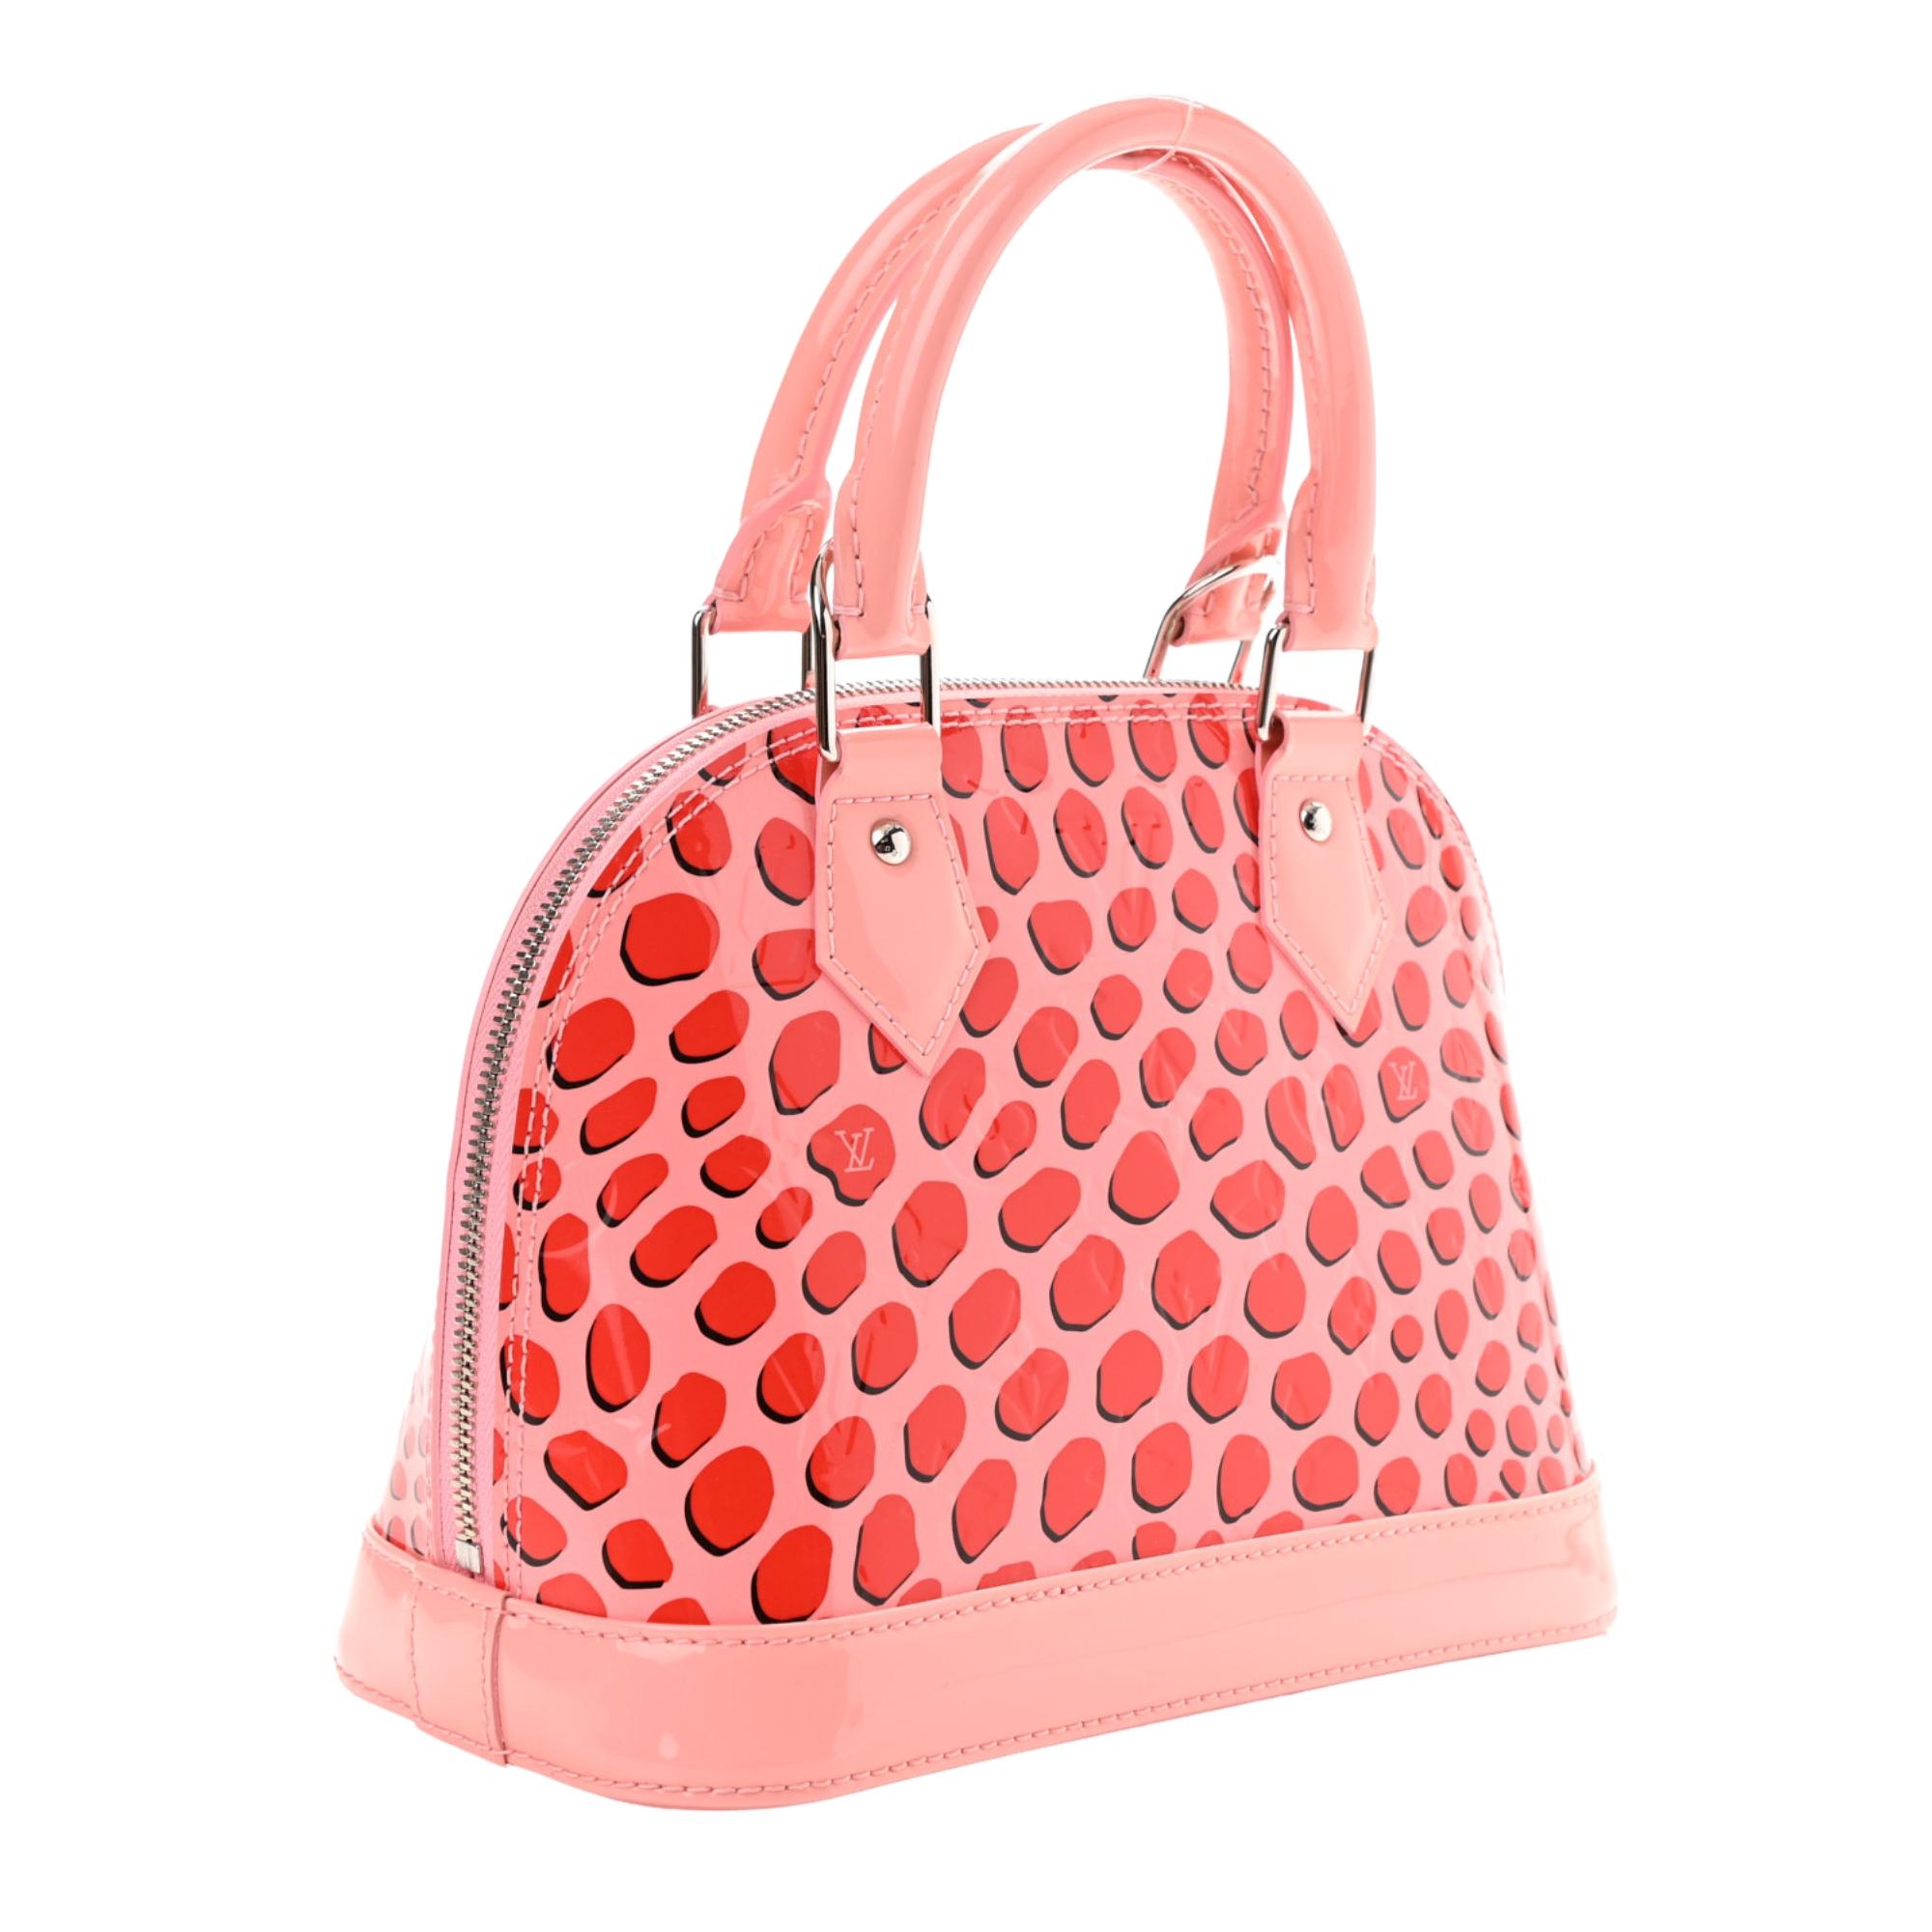 This style of patent leather monogram embossed bags are named Vernis as the French word for varnish is “vernis”.  

This fun bag is made of glossy monogram vernis patent leather in light pink. It features jungle dots in red and polished silver